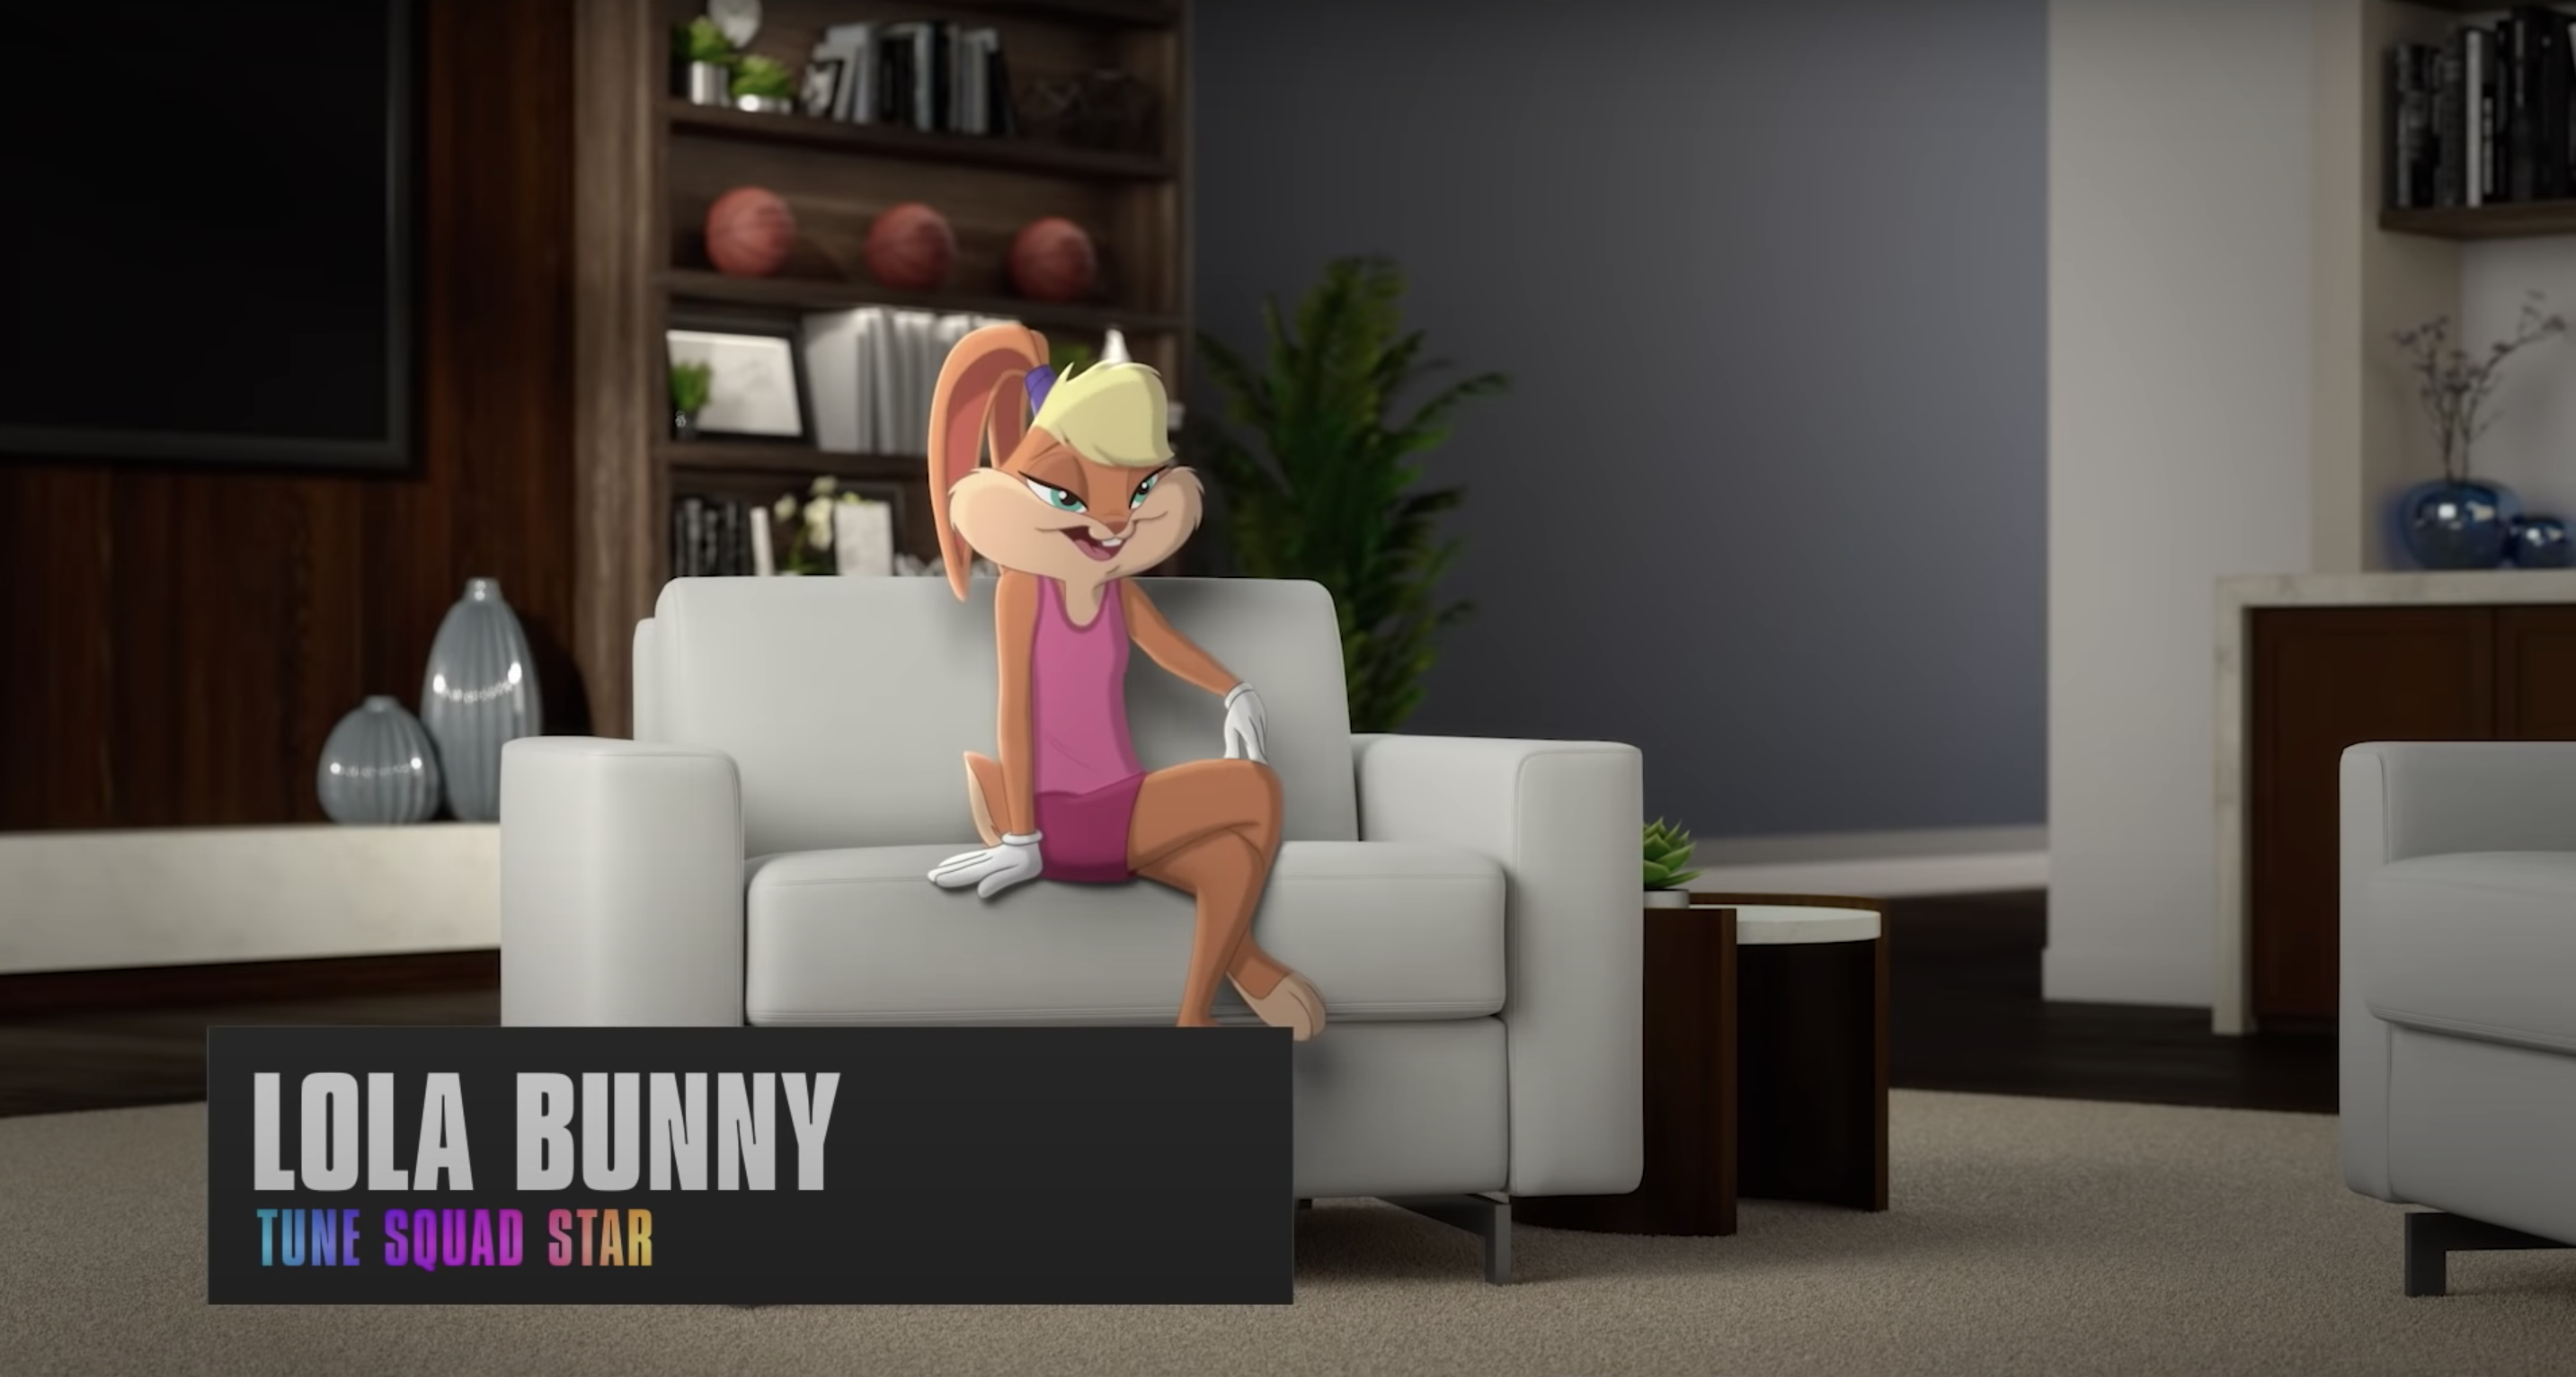 The 2021 version of Lola Bunny conducts an interview while sitting on an armchair, legs crossed